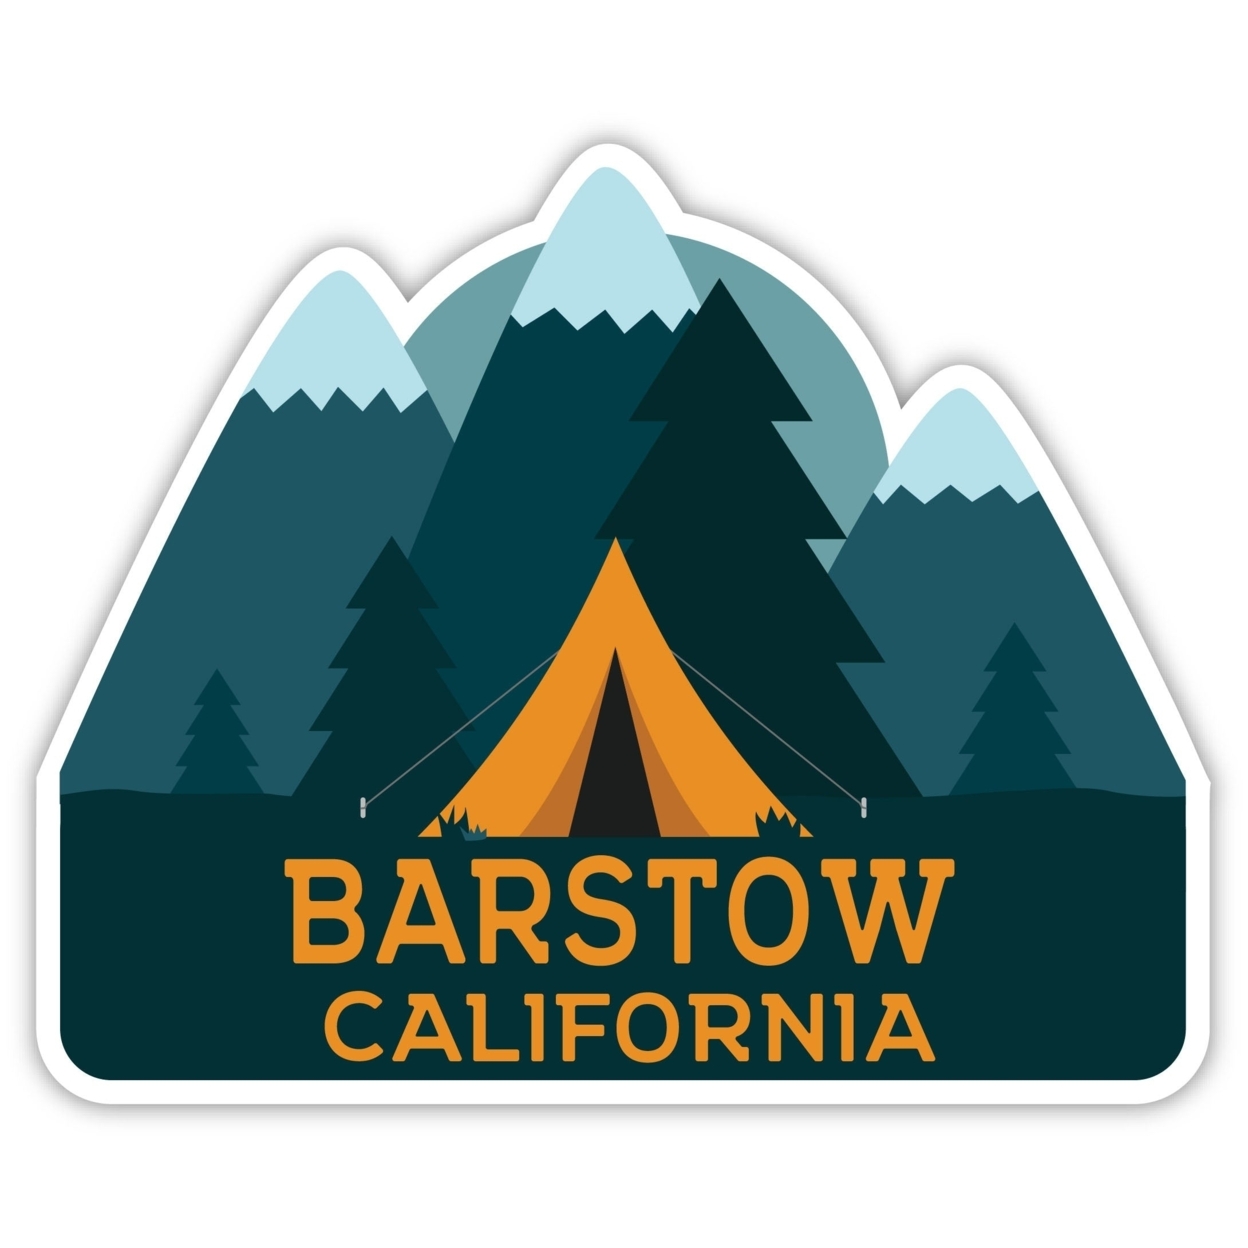 Barstow California Souvenir Decorative Stickers (Choose Theme And Size) - 4-Pack, 2-Inch, Tent